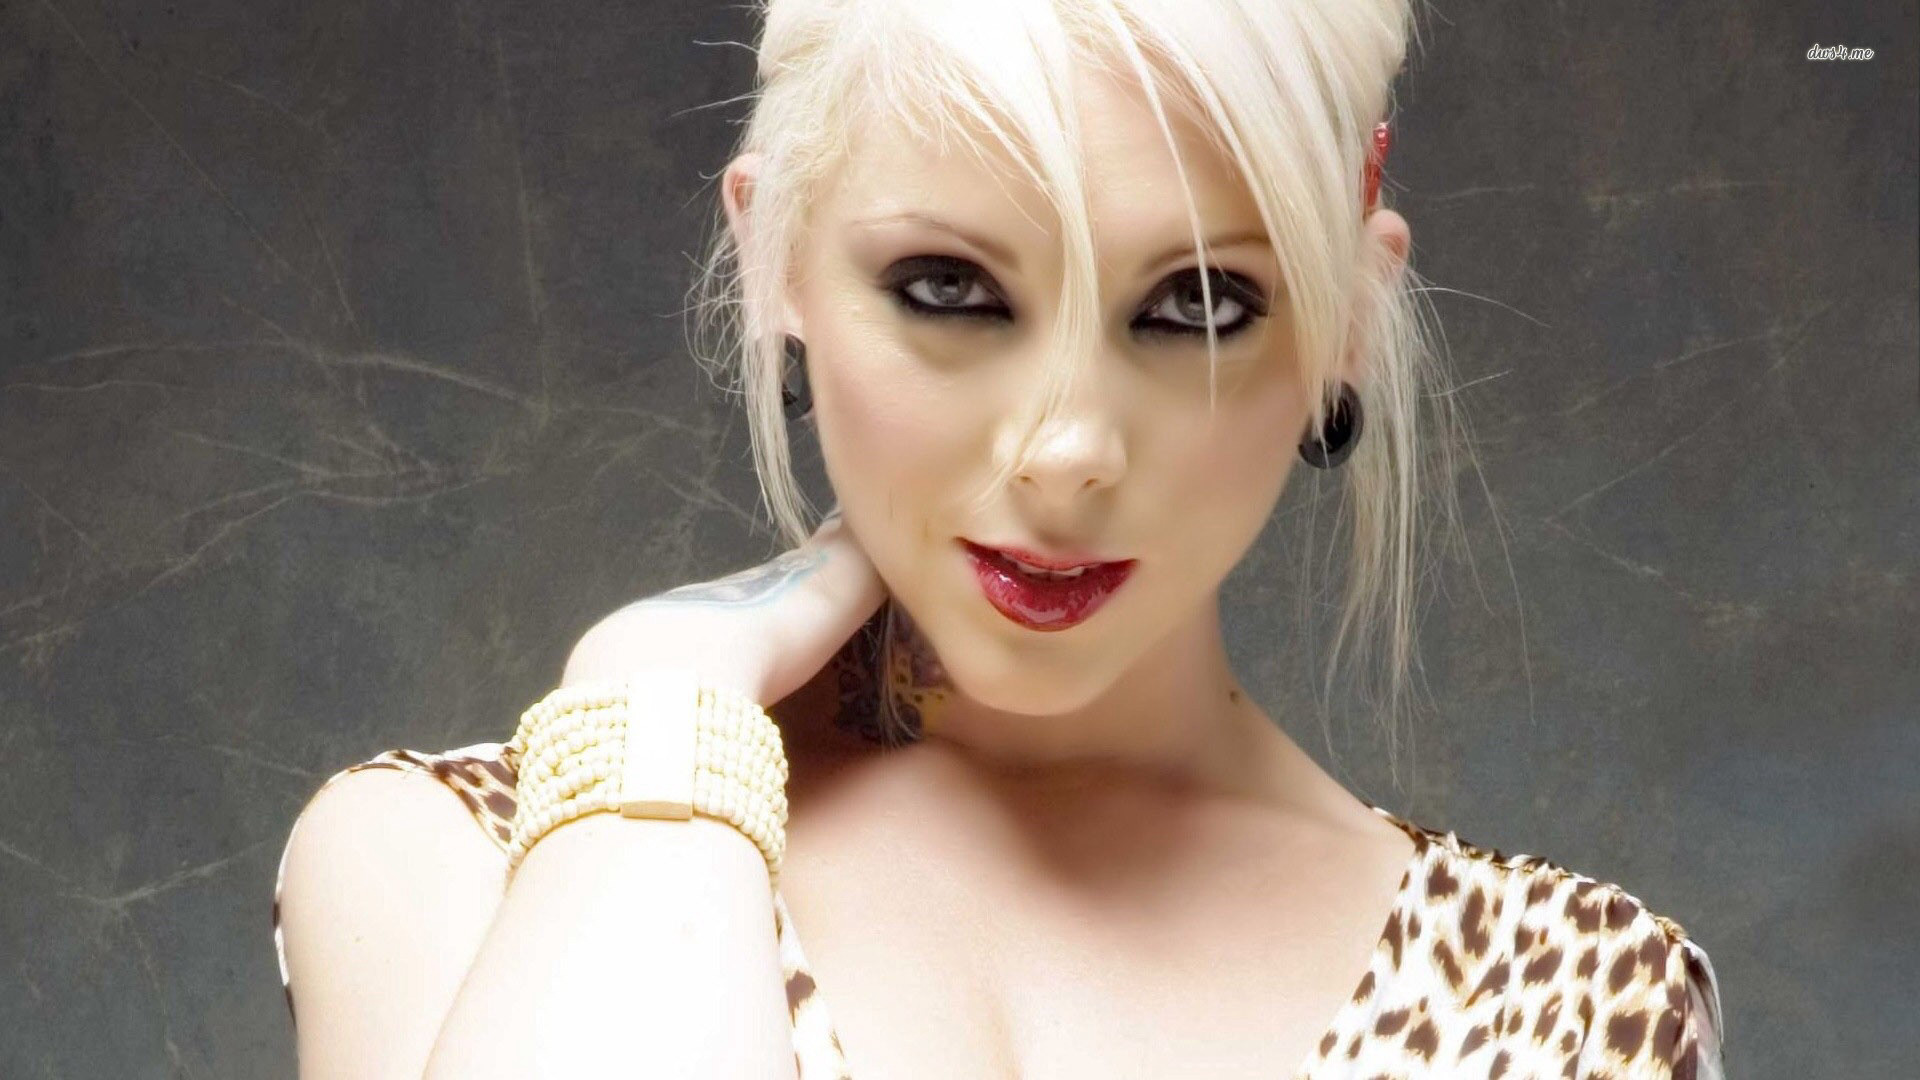 Maria Brink lead singer of heavy metal band In This Moment. Dont